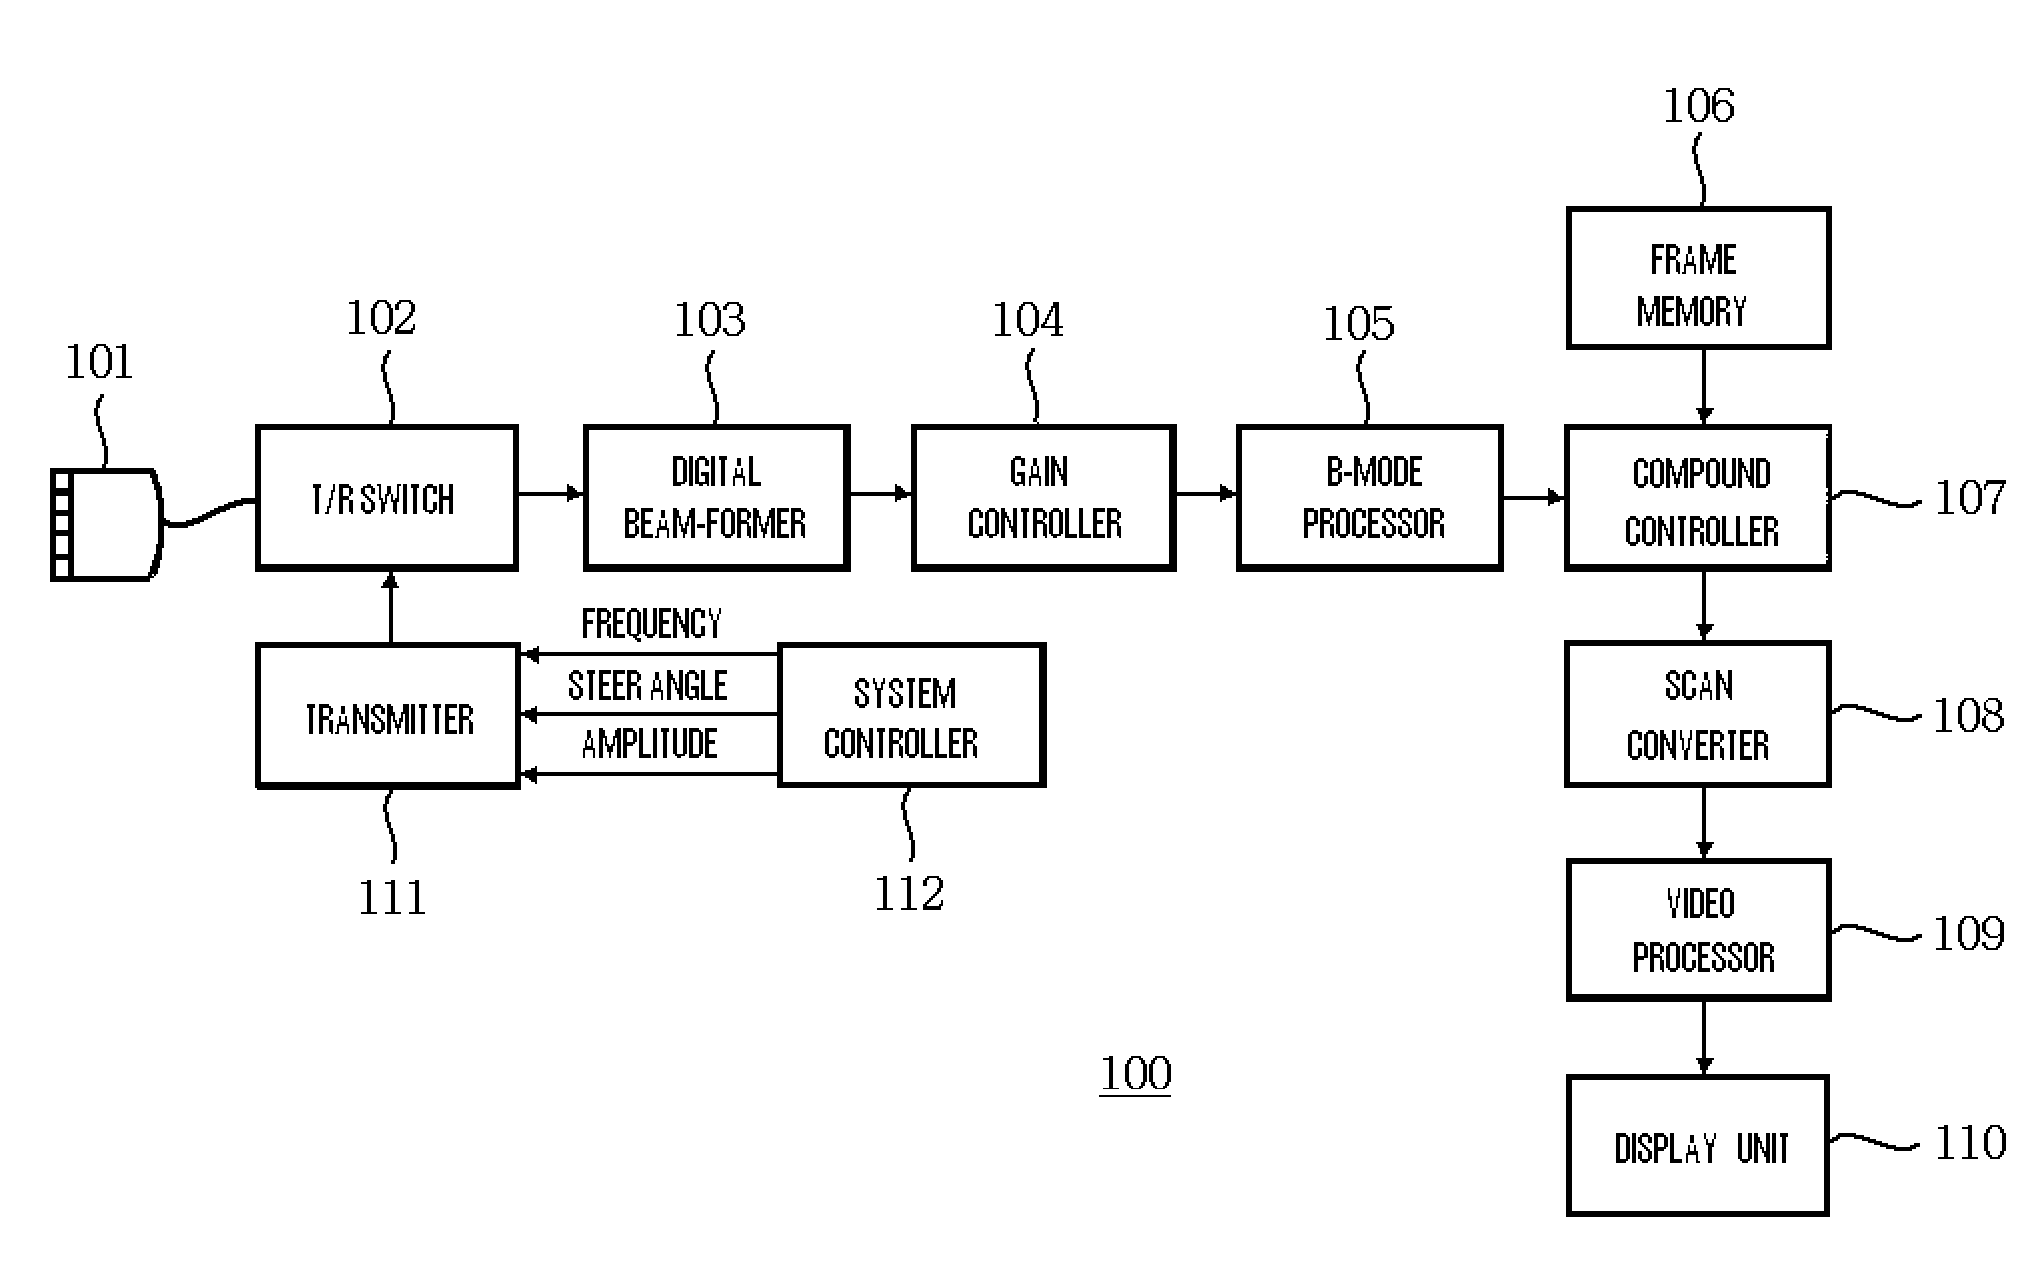 Method of Compounding and Ultrasound Image